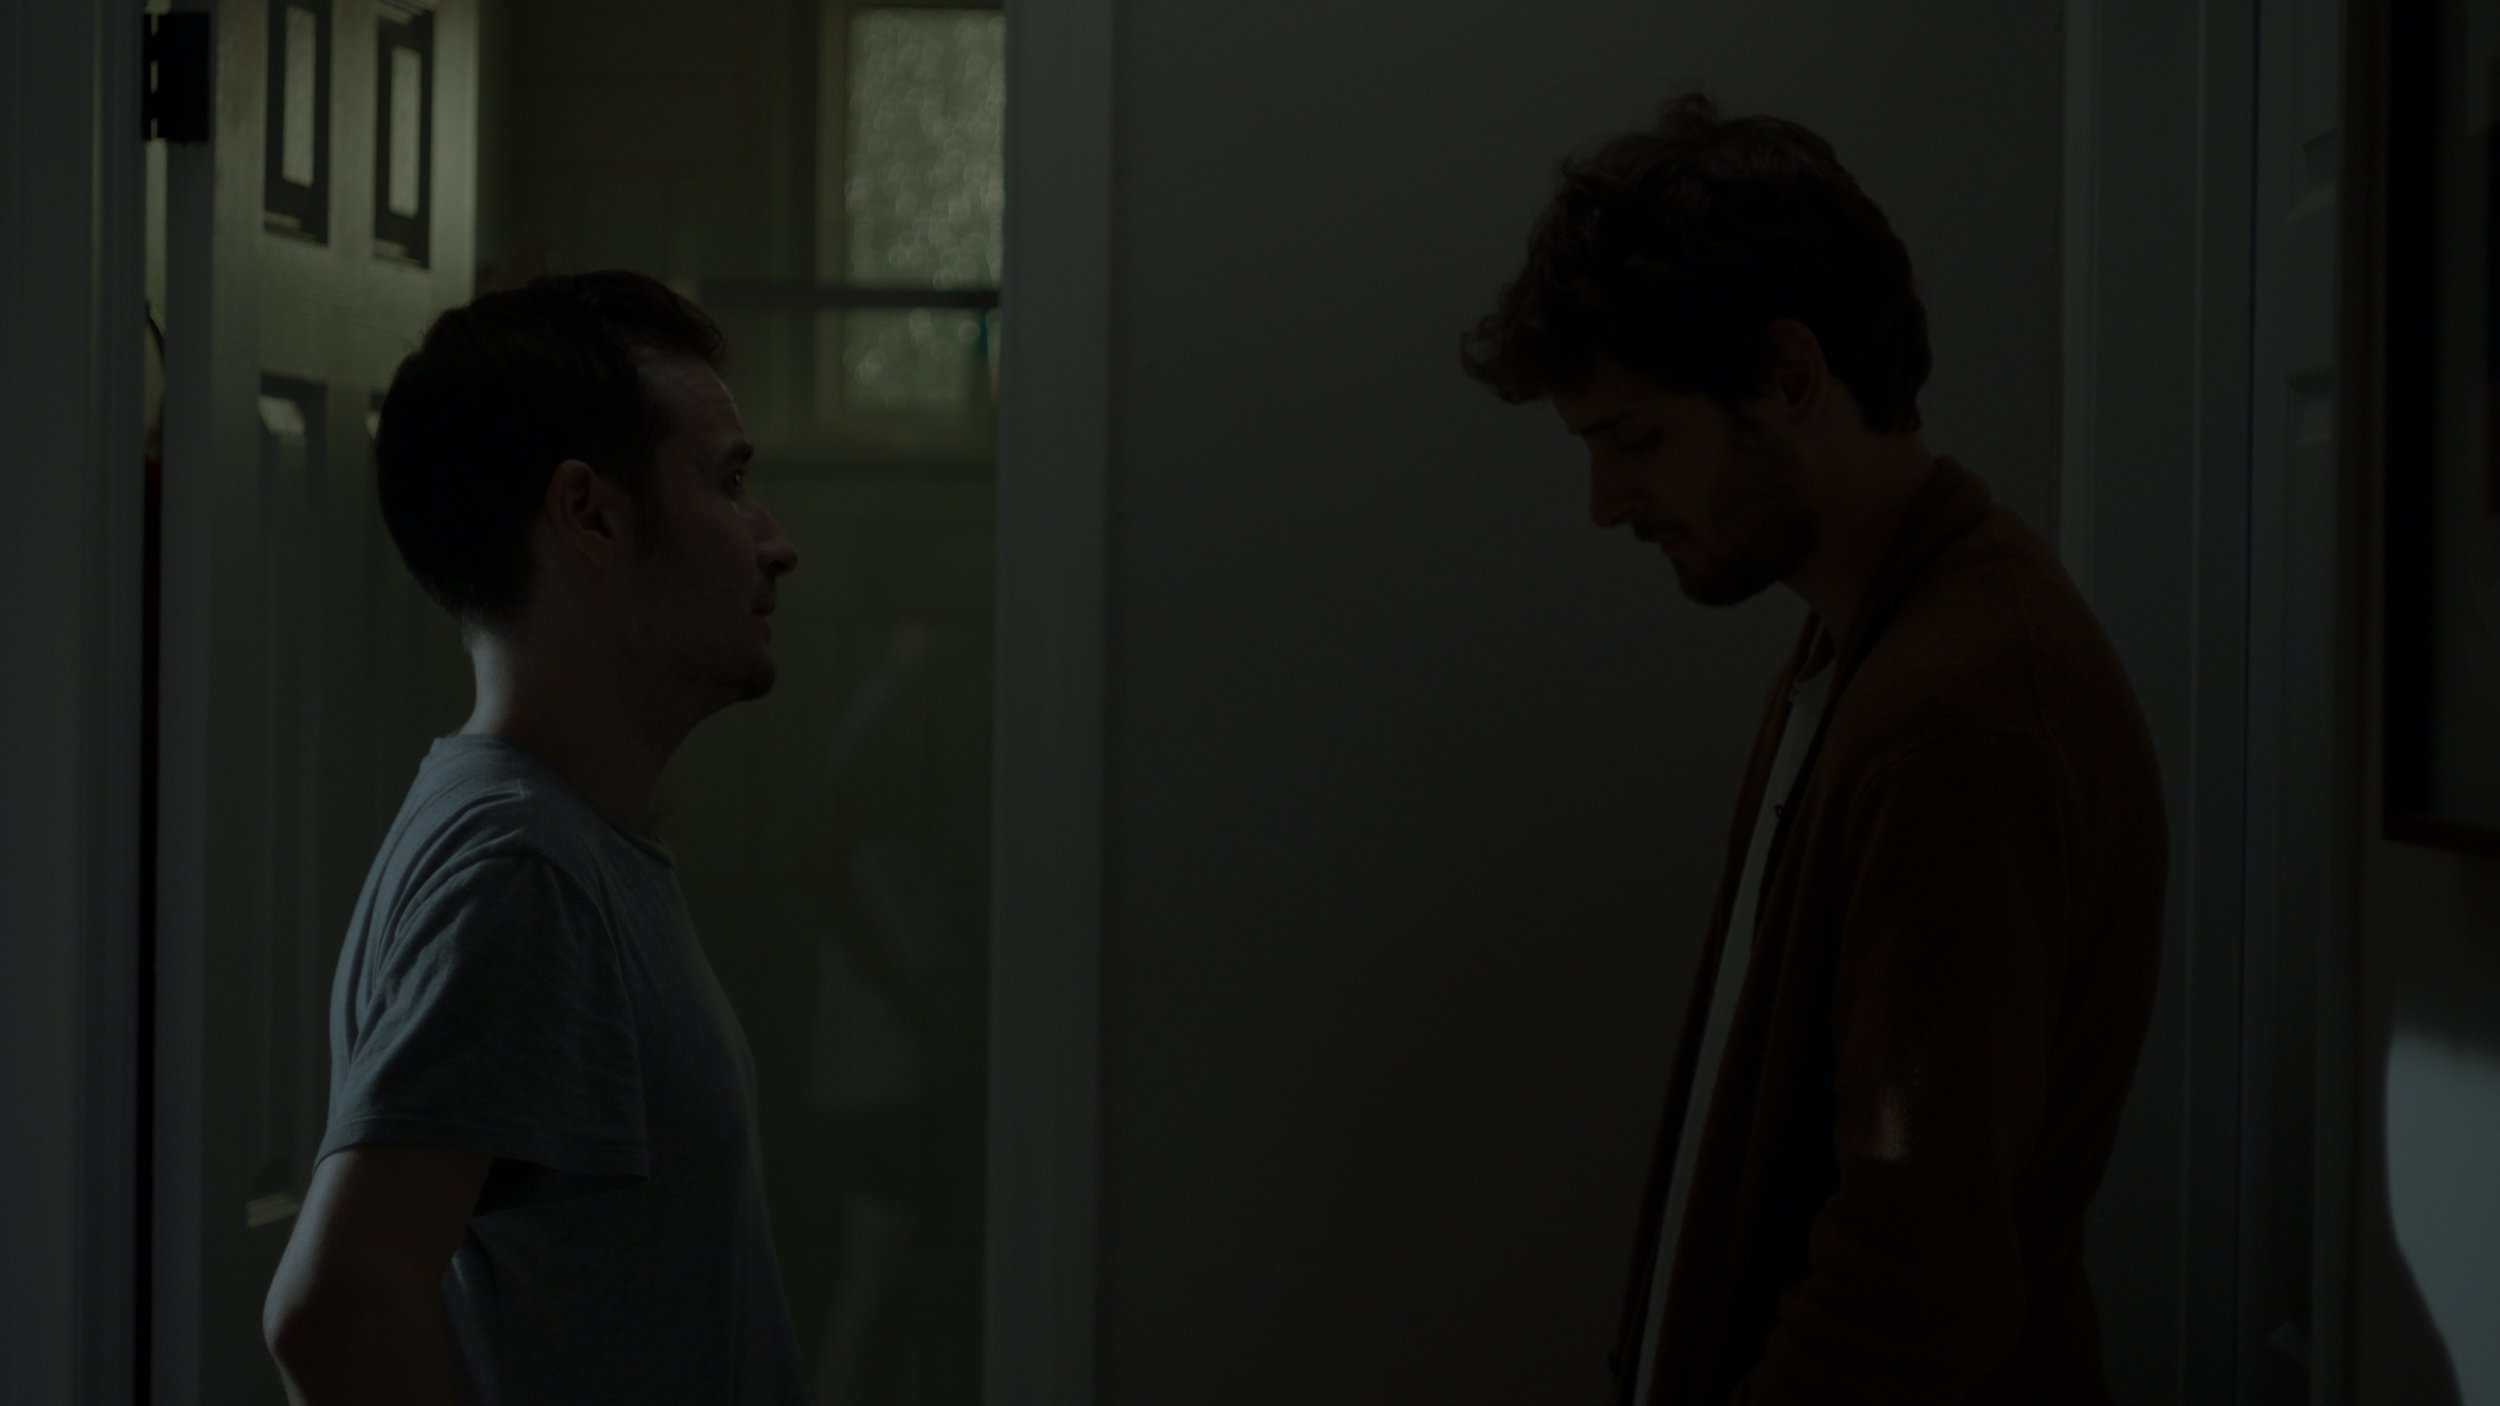 Jack (Frank Mosley, left) and Vincent (Hugo de Sousa, right) have a whisper fight in the middle of the night in their 2022 short film The Event.